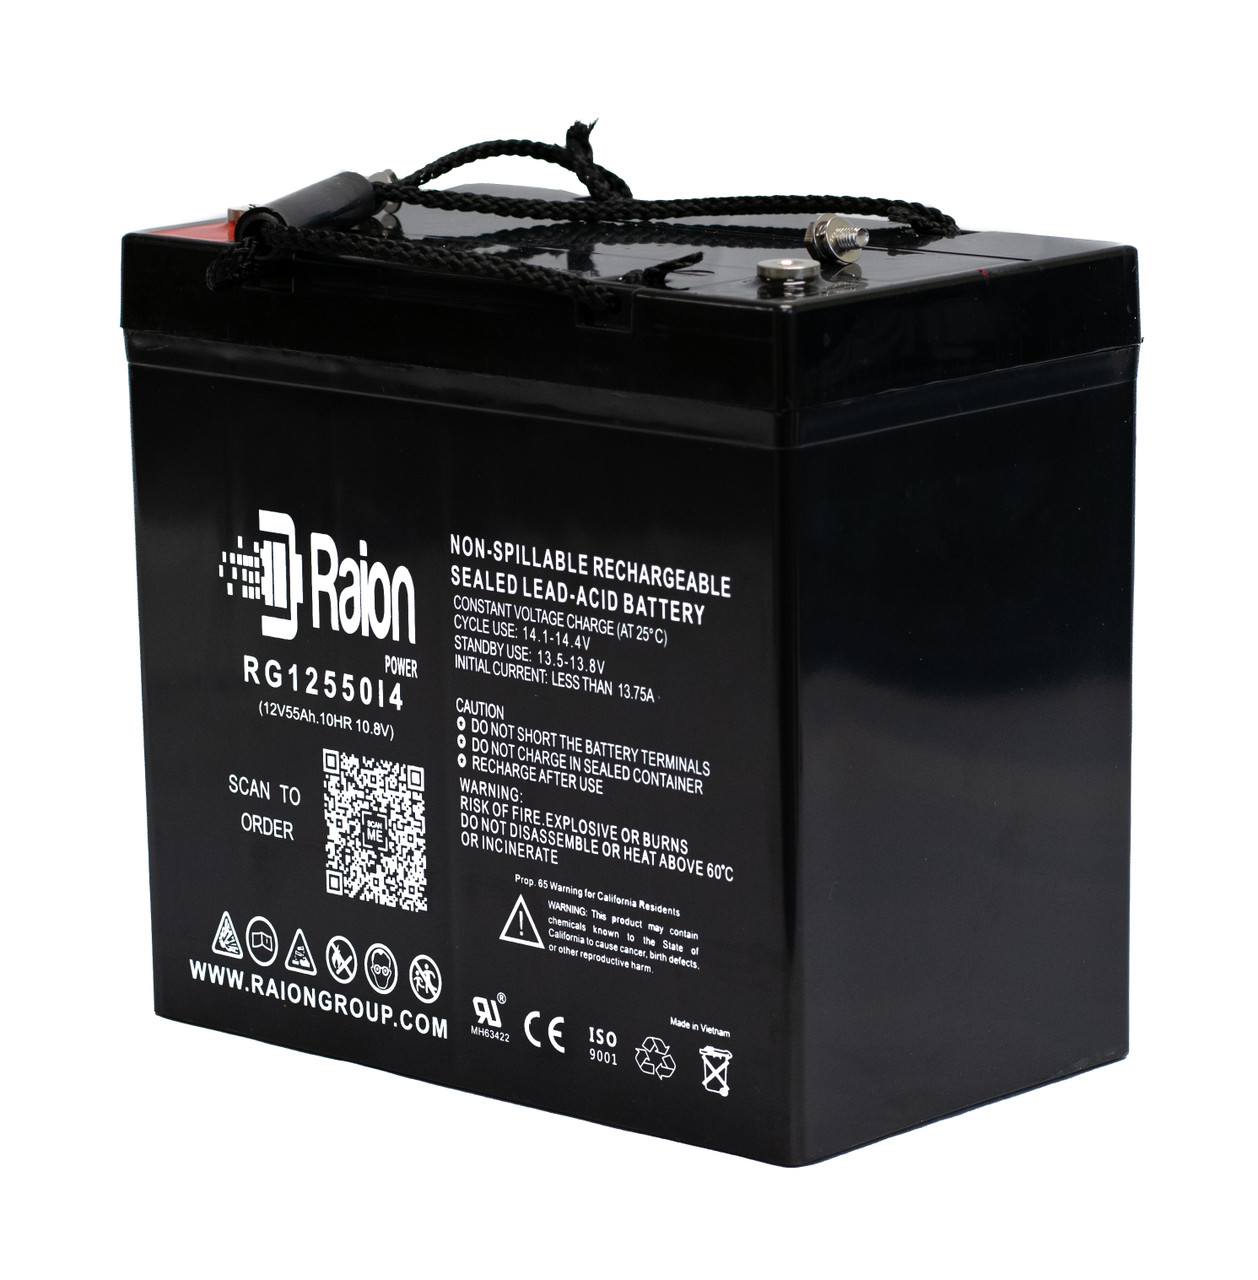 Raion Power Replacement 12V 55Ah Battery for Vision HF12-165W-X - 1 Pack